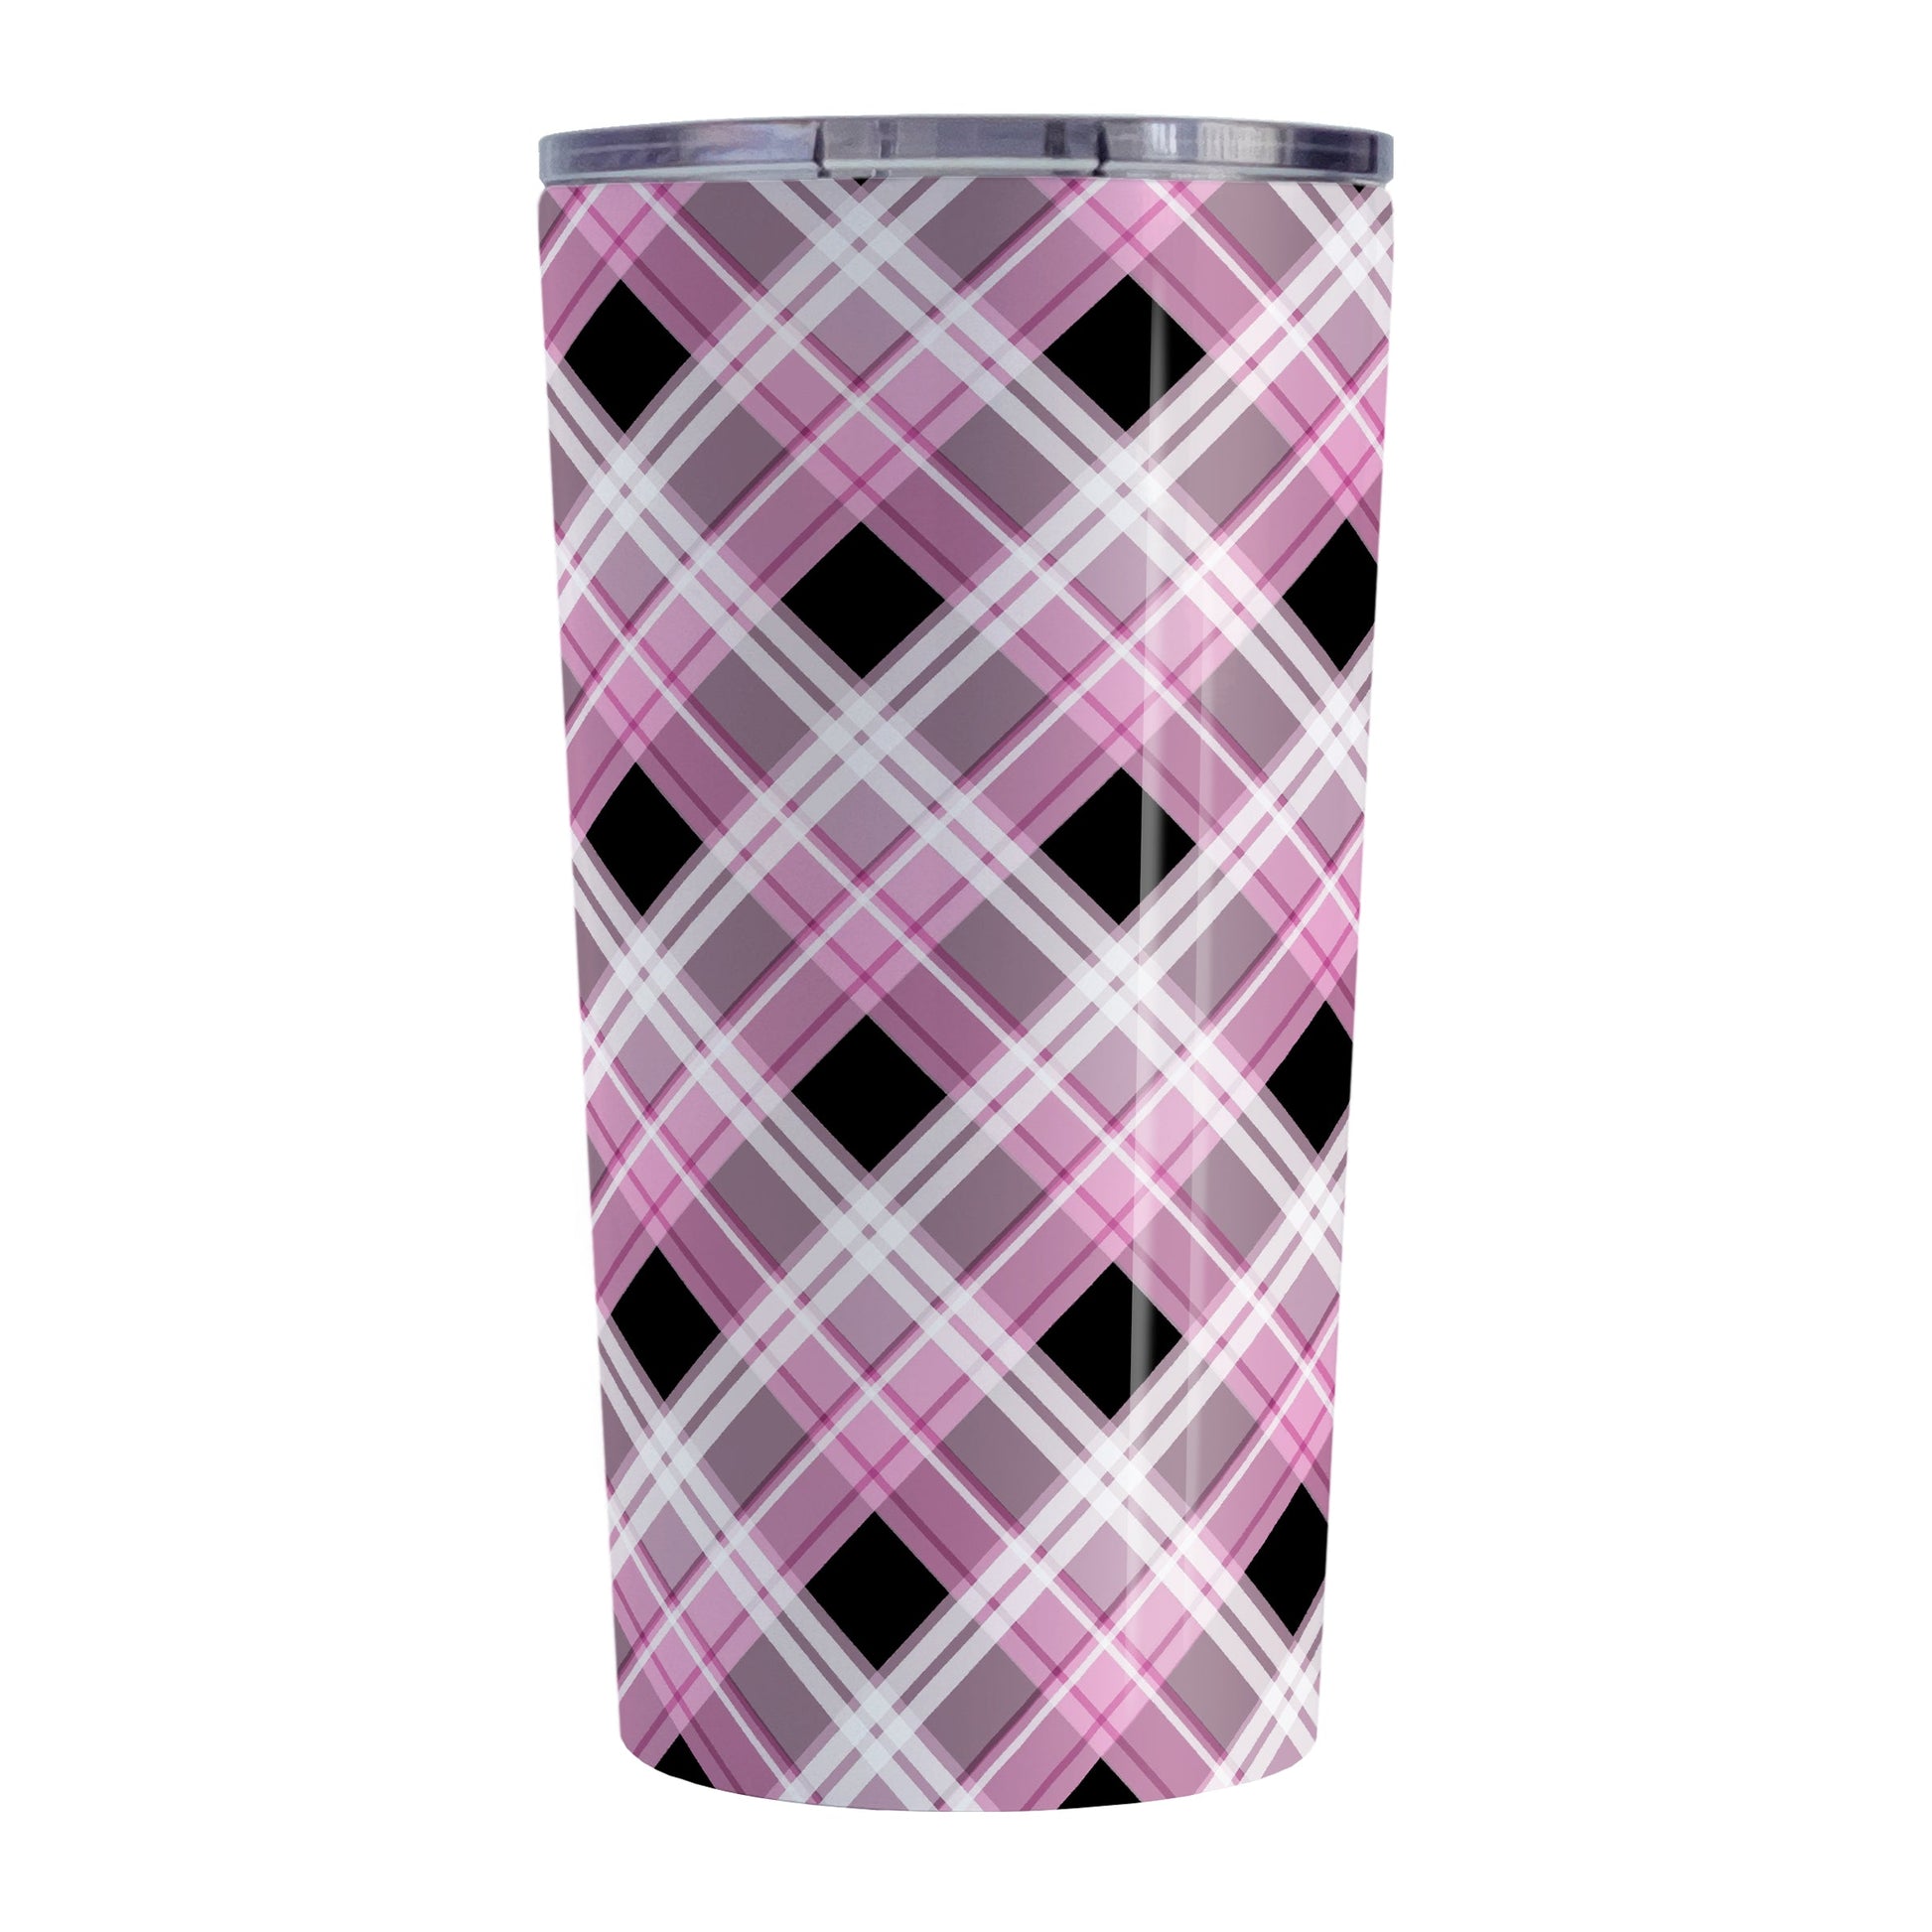 Alternative Black and Pink Plaid Tumbler Cup (20oz) at Amy's Coffee Mugs. A stainless steel insulated tumbler cup designed with a diagonal pink, black, and white plaid pattern that wraps around the cup. A tumbler cup designed for someone who loves plaid patterns and the colors pink and black together.